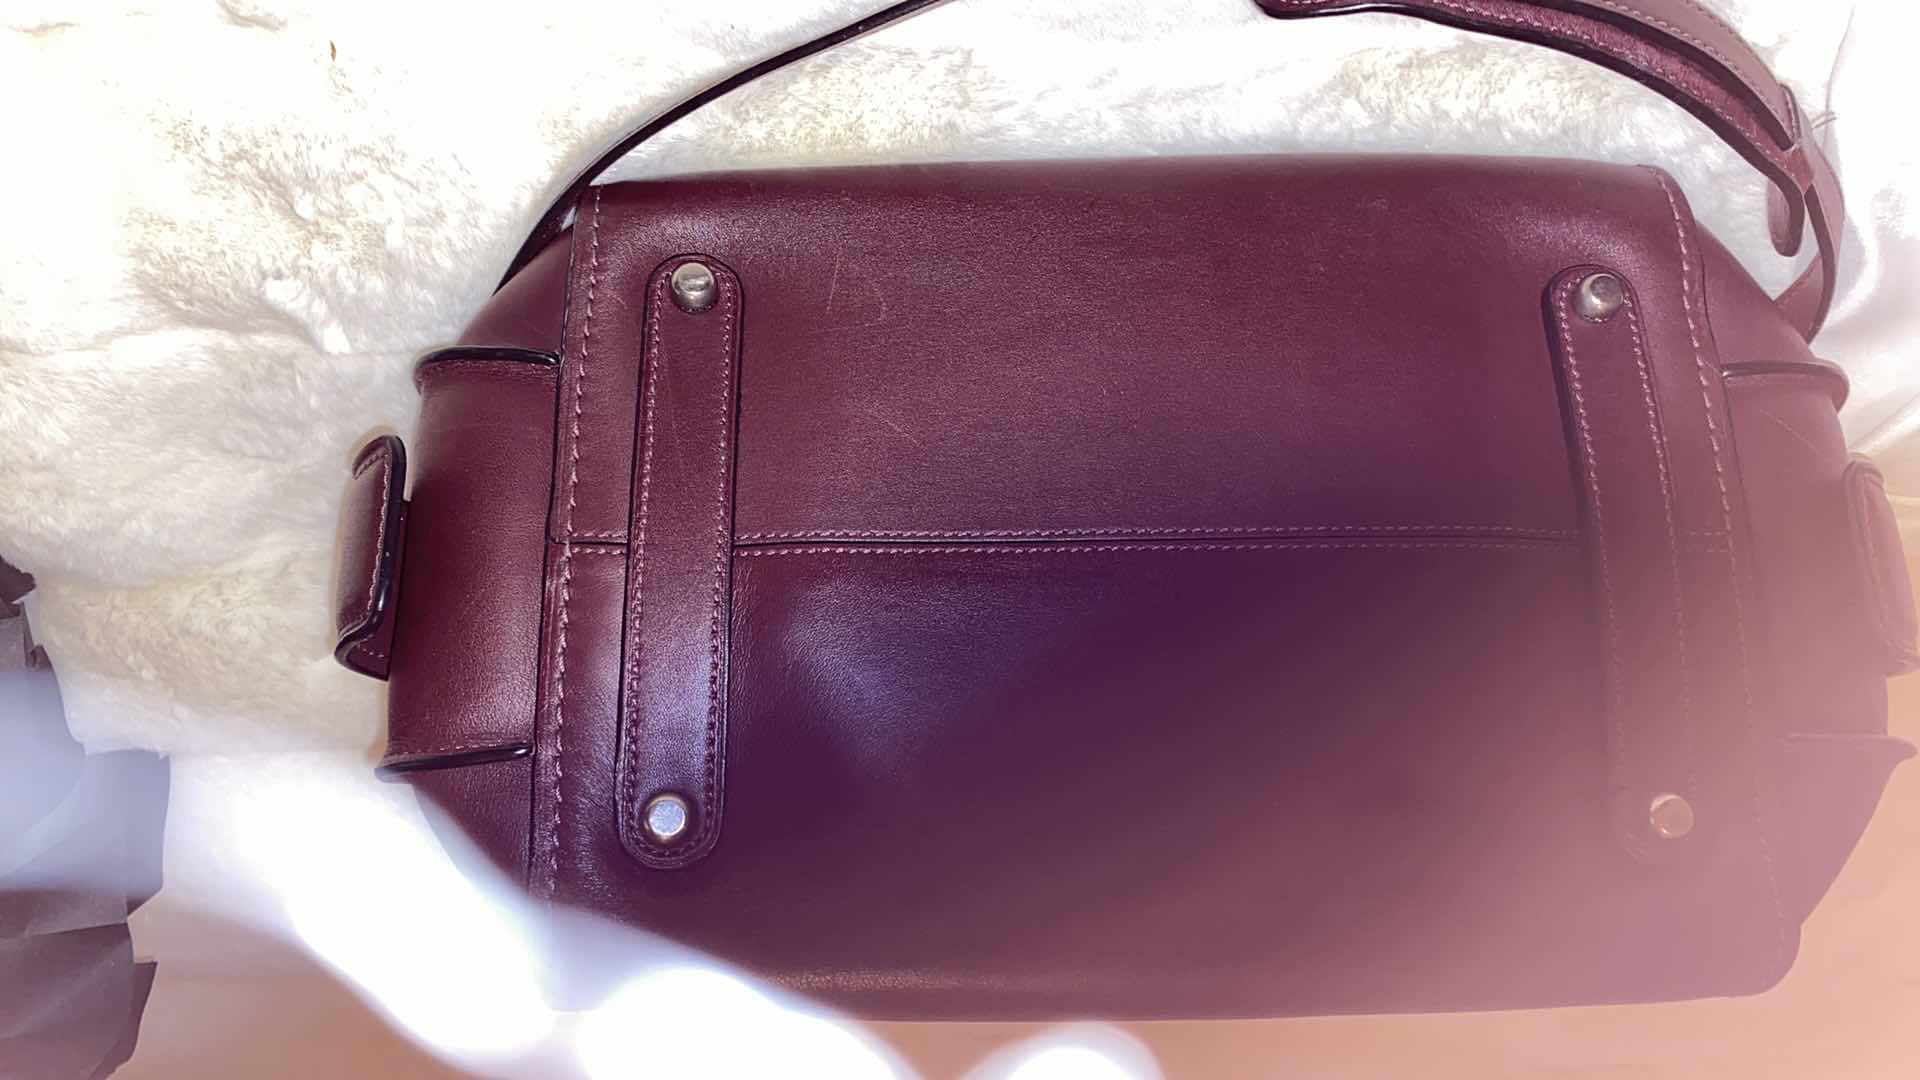 Photo 10 of $869 AUTHENTIC COACH ACE SATCHEL IN BURGUNDY WITH STRAP, WHIPSTITCHED HANDLES AND GUNMETAL HARDWARE INCLUDES DUSTBAG- NON RETURABLE - FINAL SALE